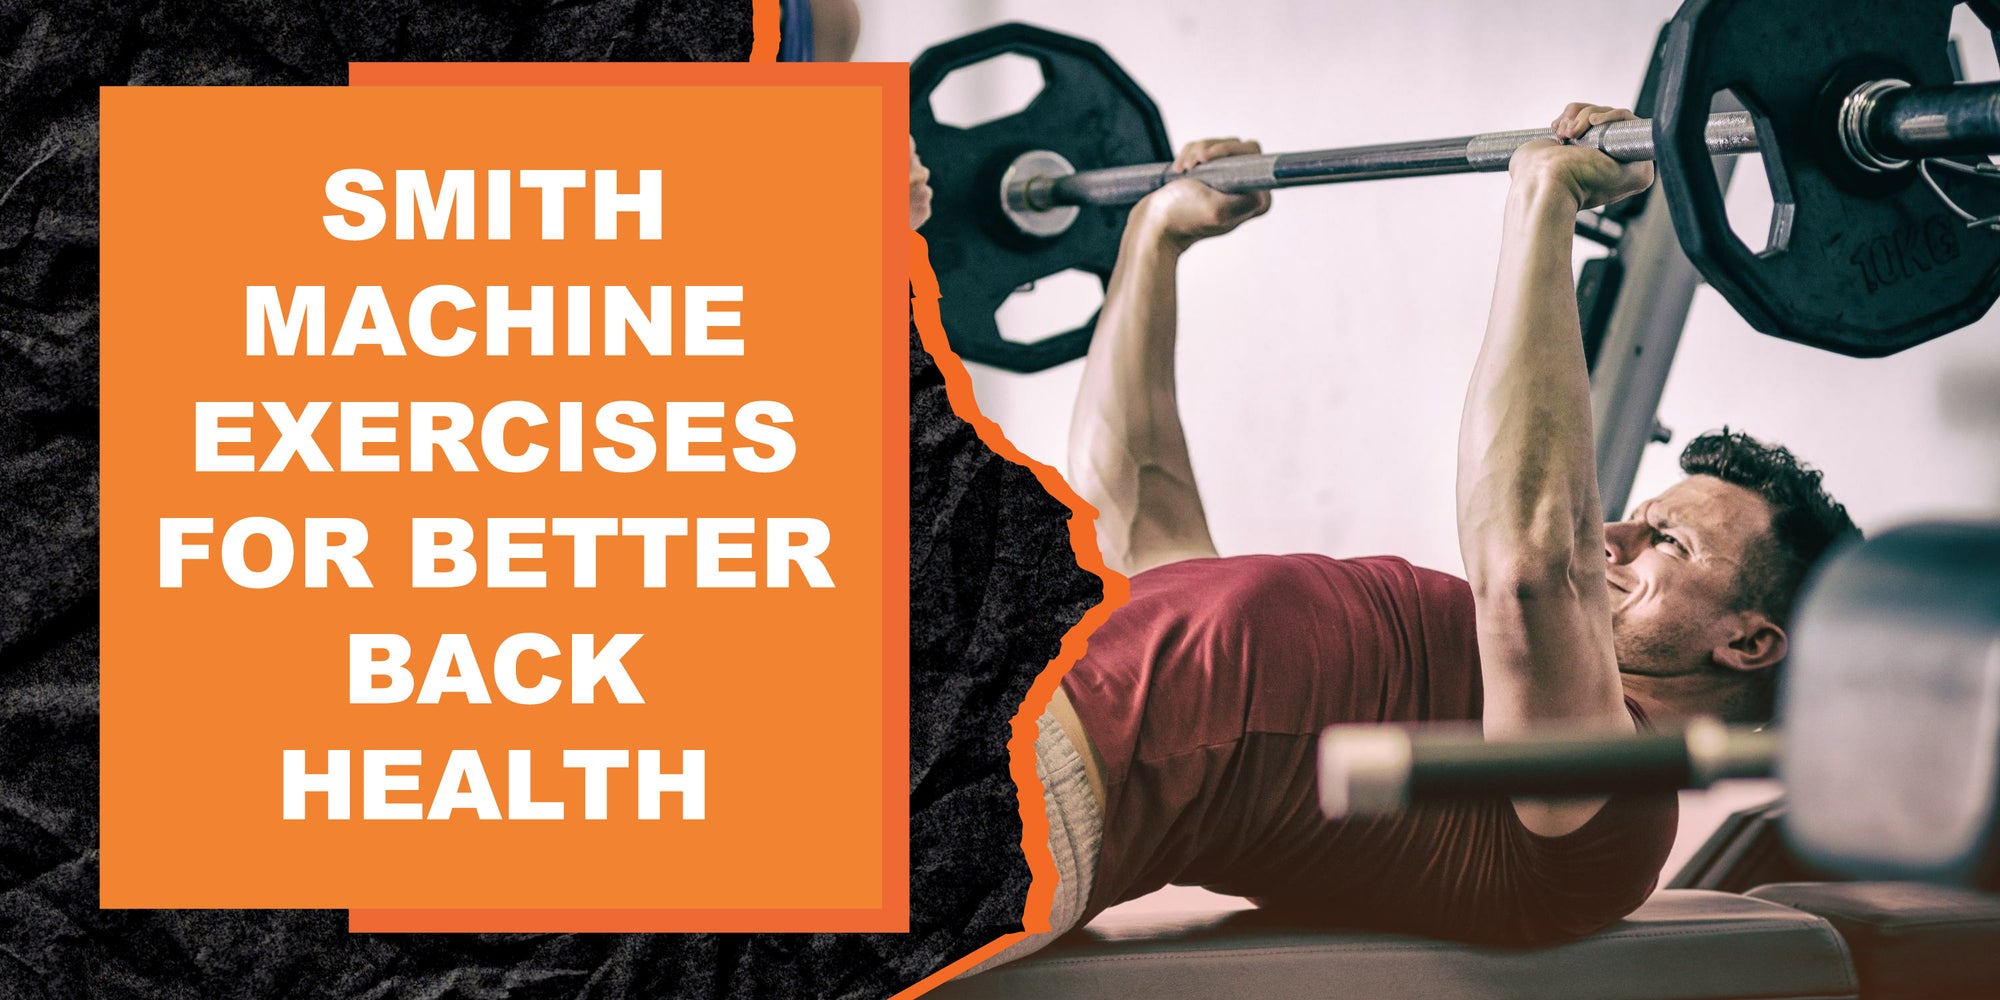 Smith Machine Exercises for Better Back Health